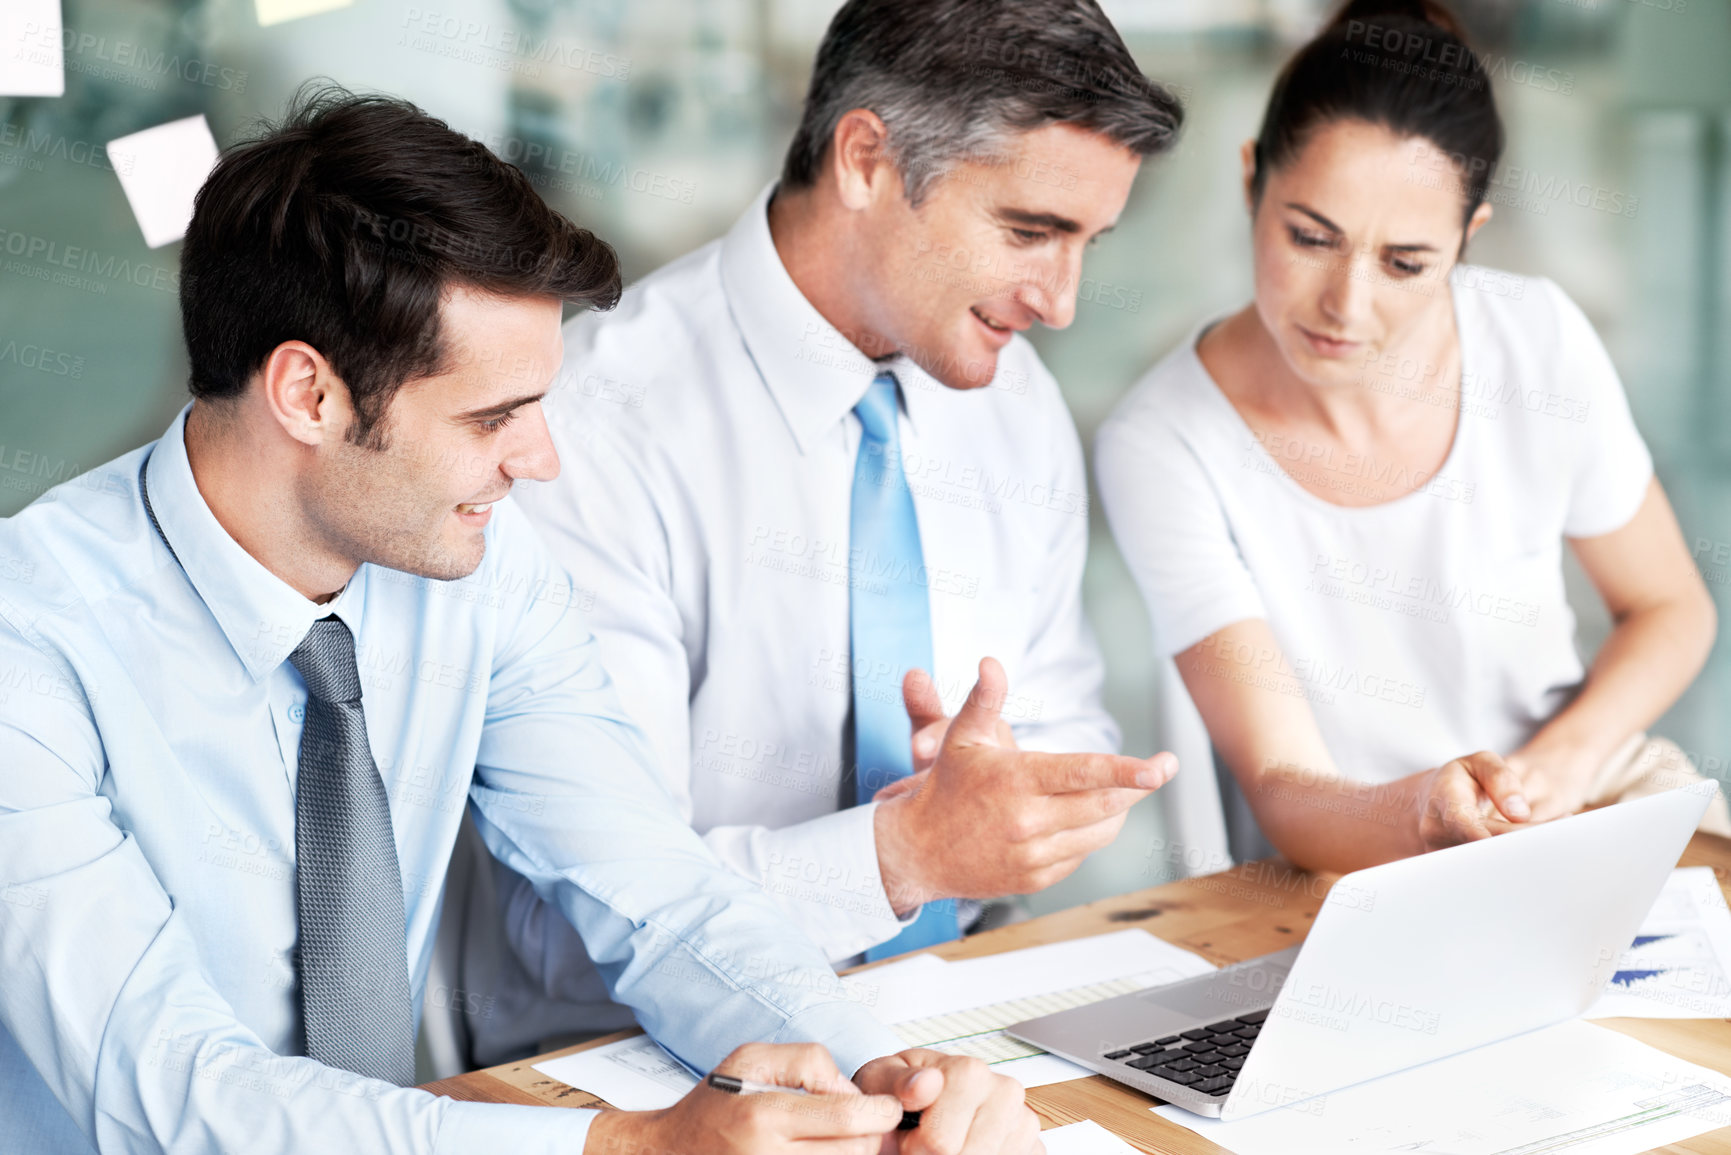 Buy stock photo Group of businesspeople working together on a project